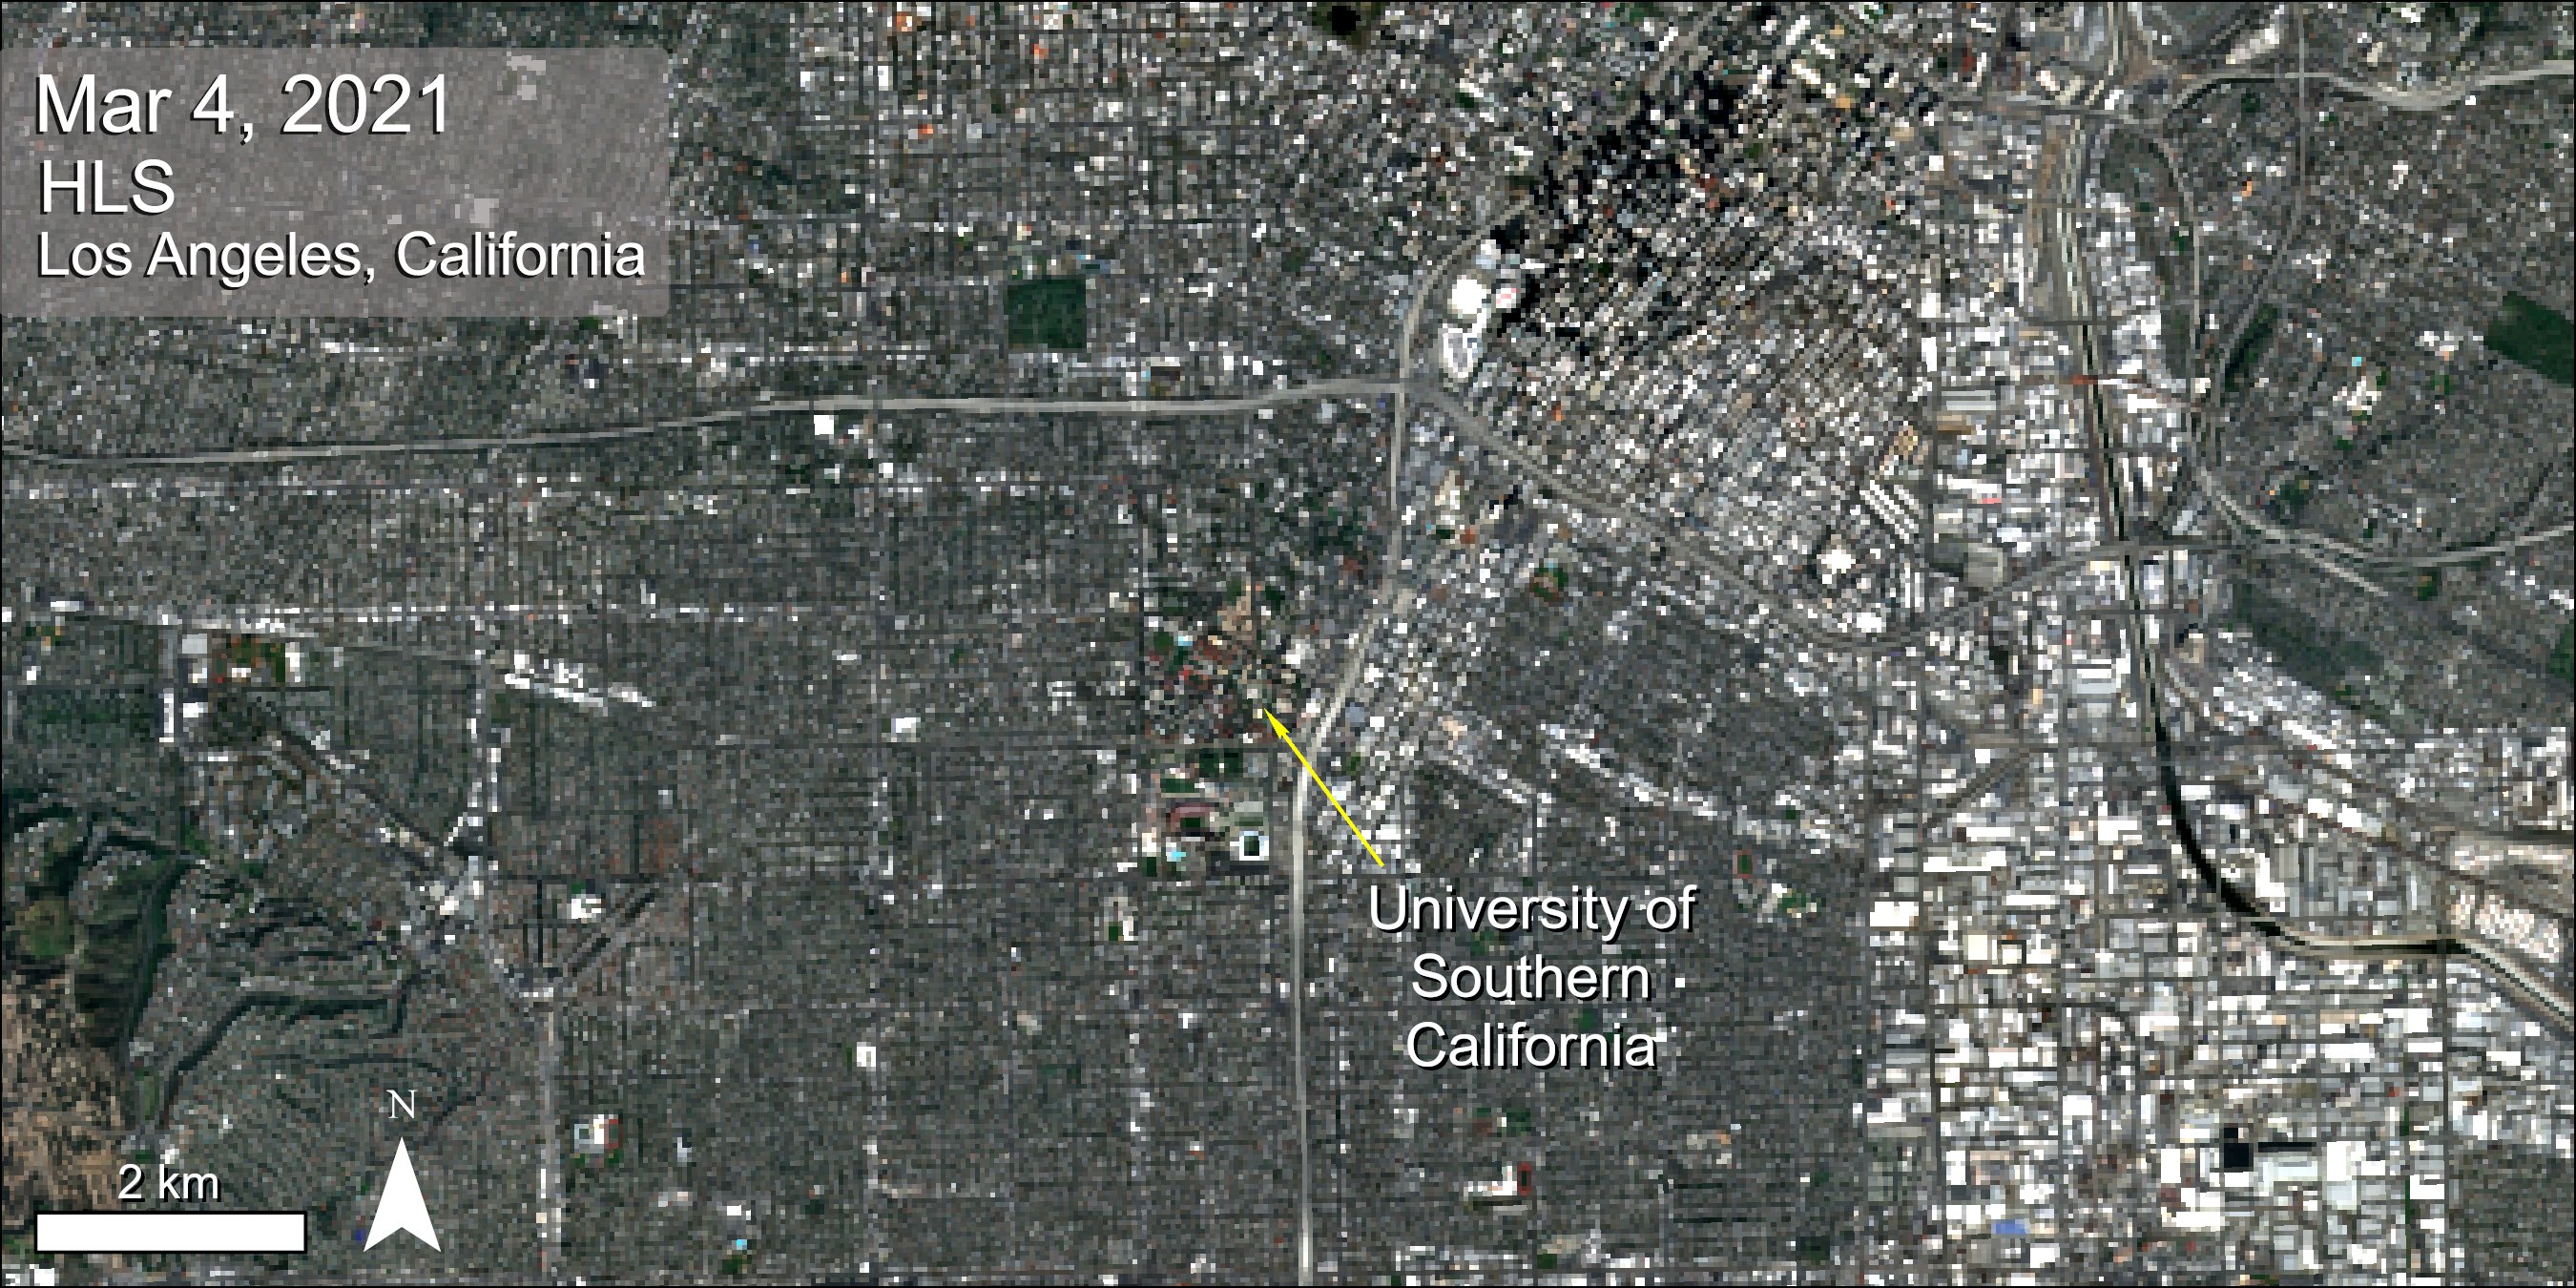 HLS surface reflectance data over Los Angeles, California.